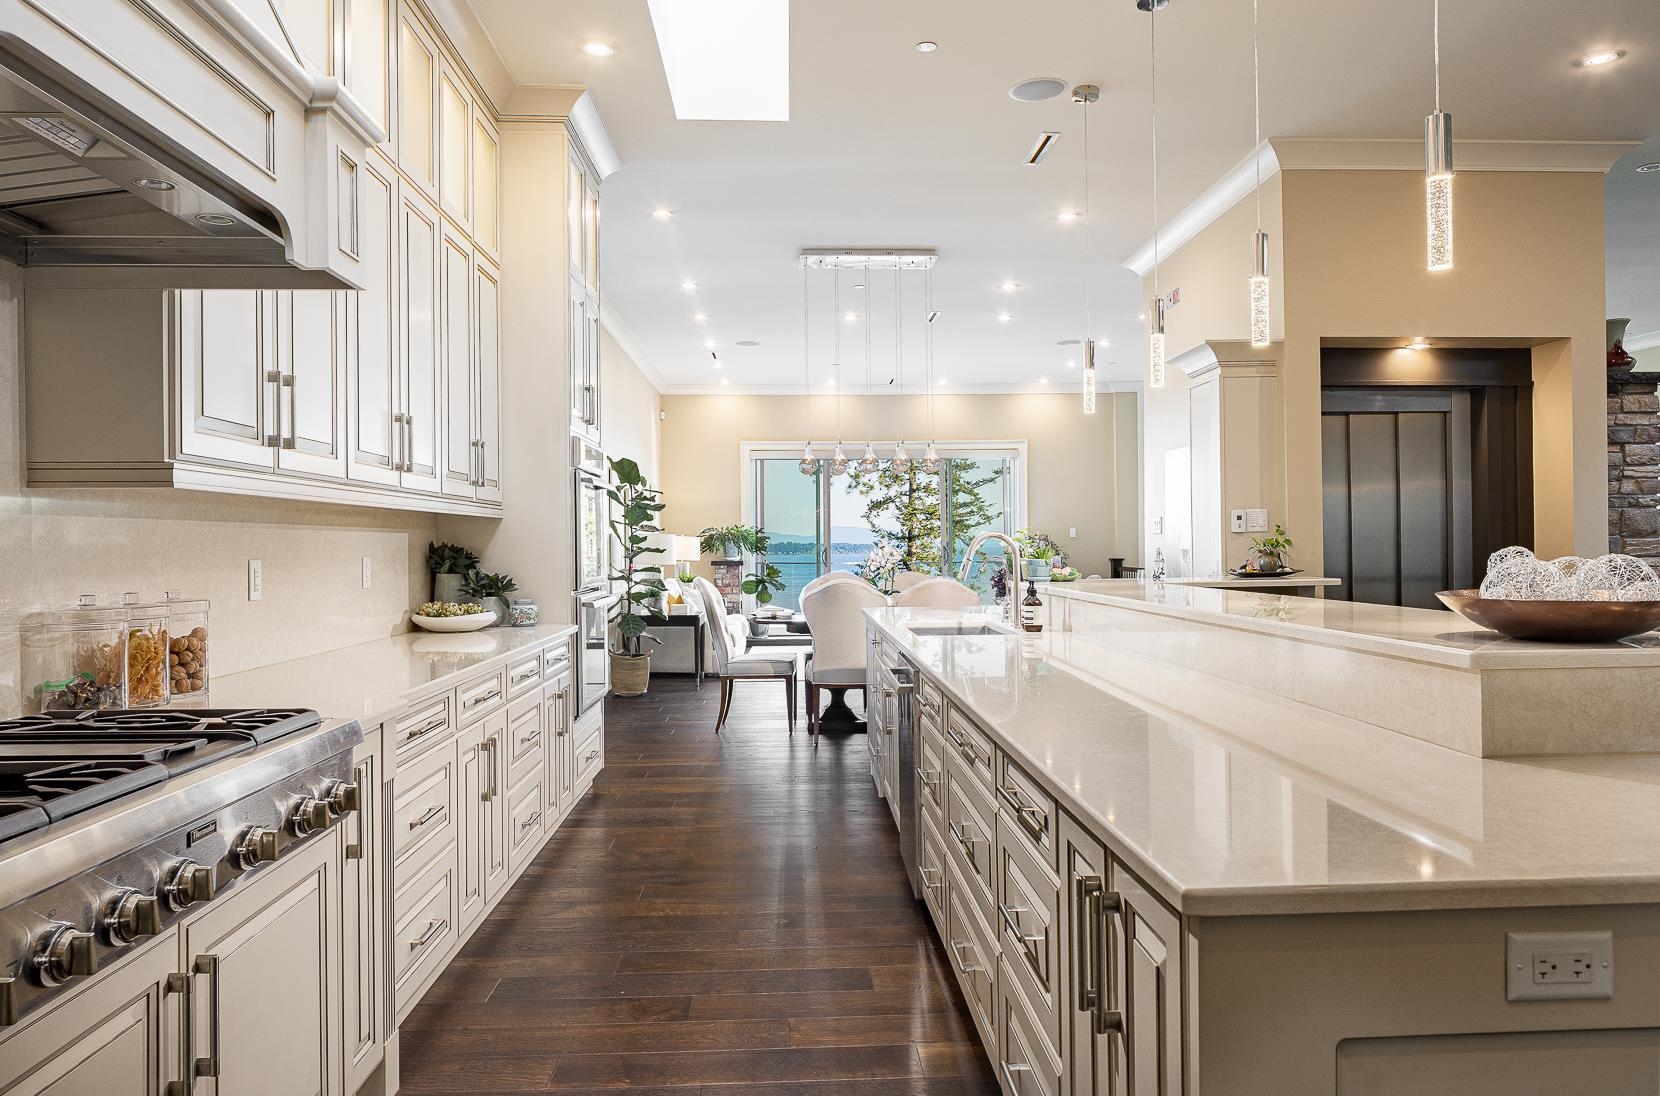 Expansive kitchen prep area for meal preparation and culinary exploration